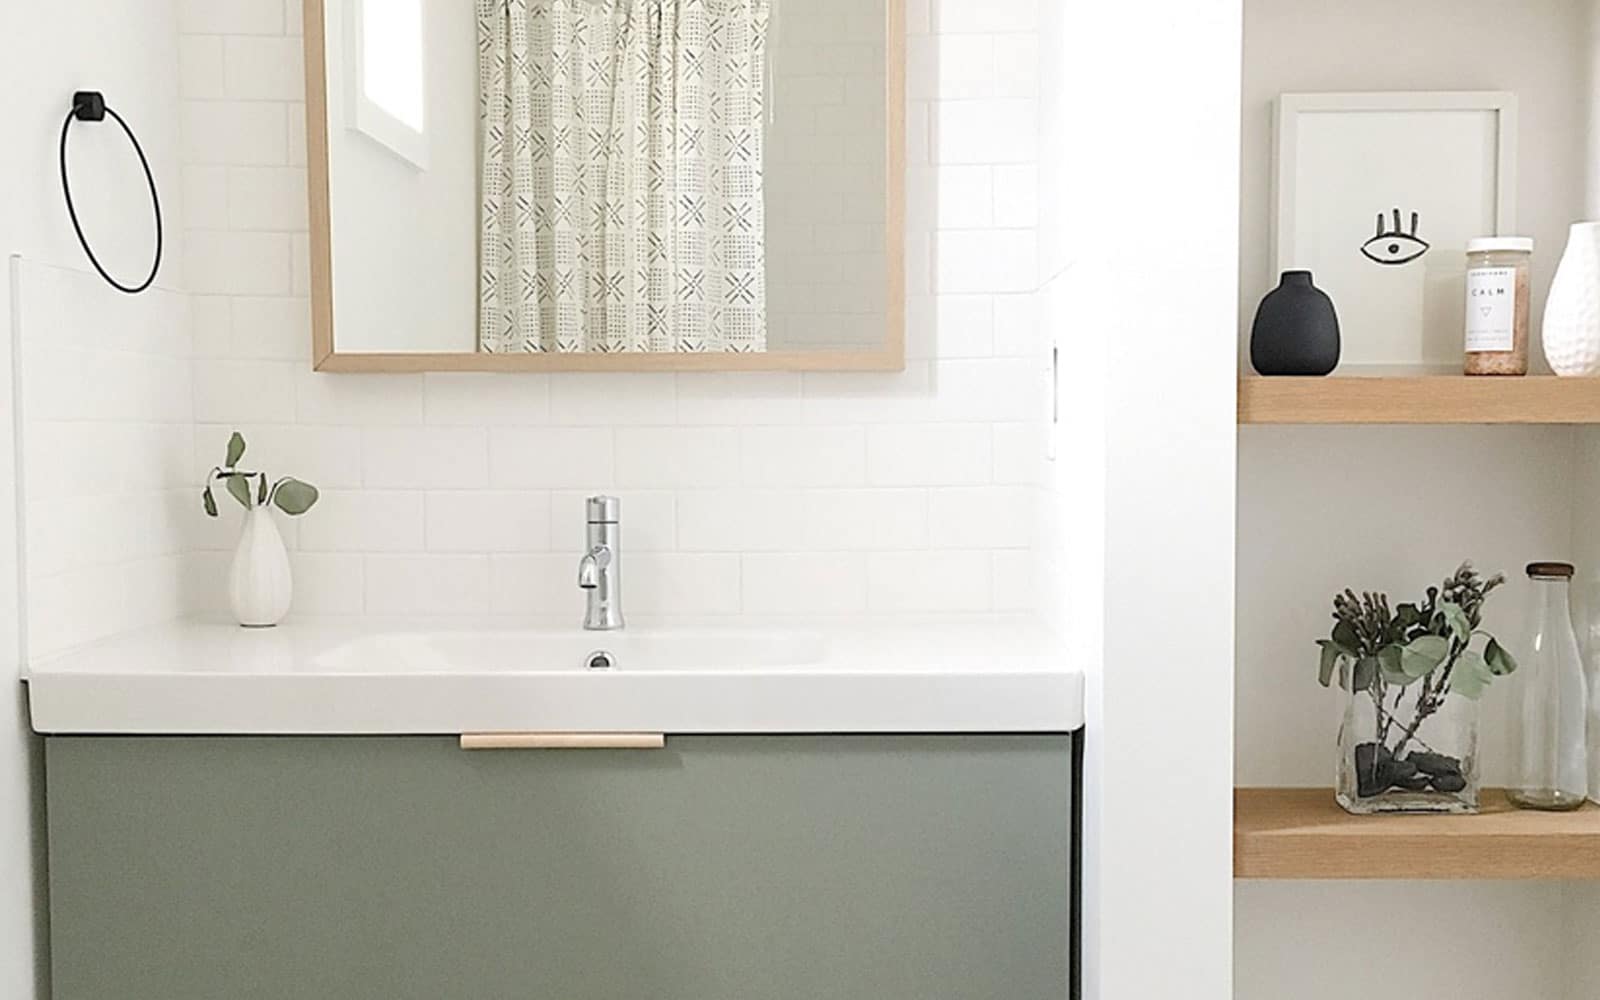 Building Home: The Kid/Guest Bathroom